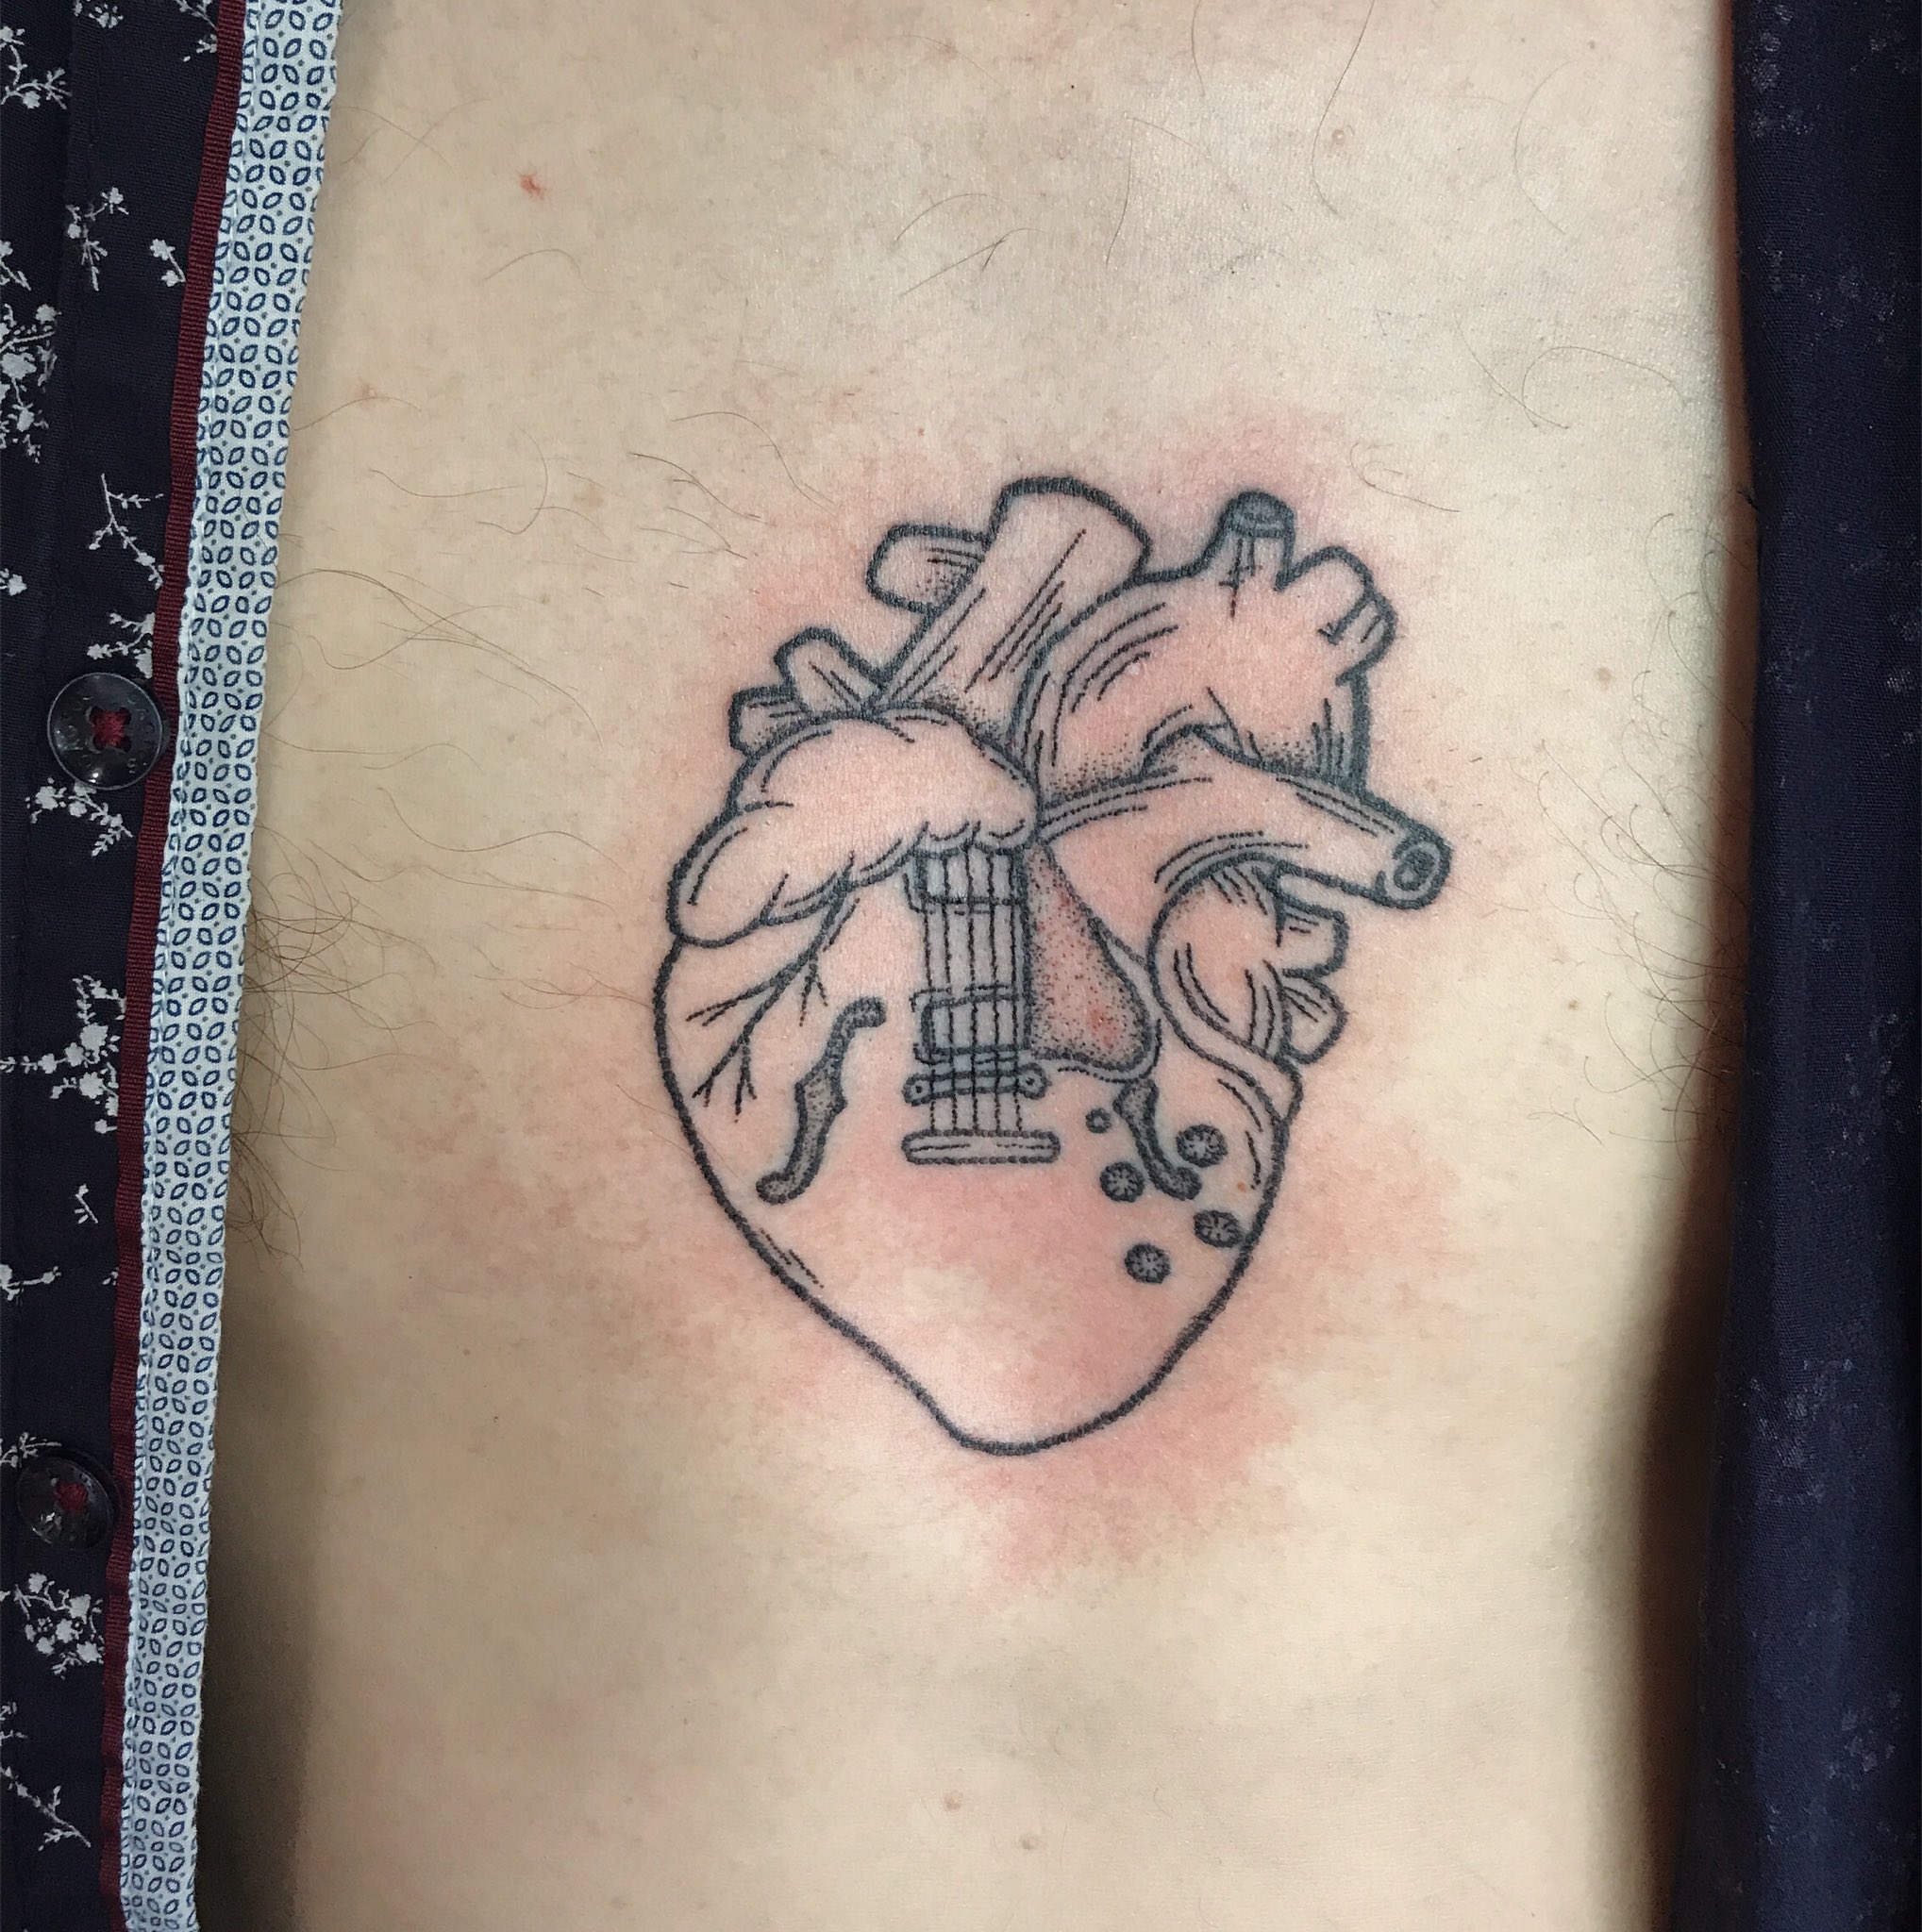 had this piece done today to start my music sleeve : r/TattooDesigns